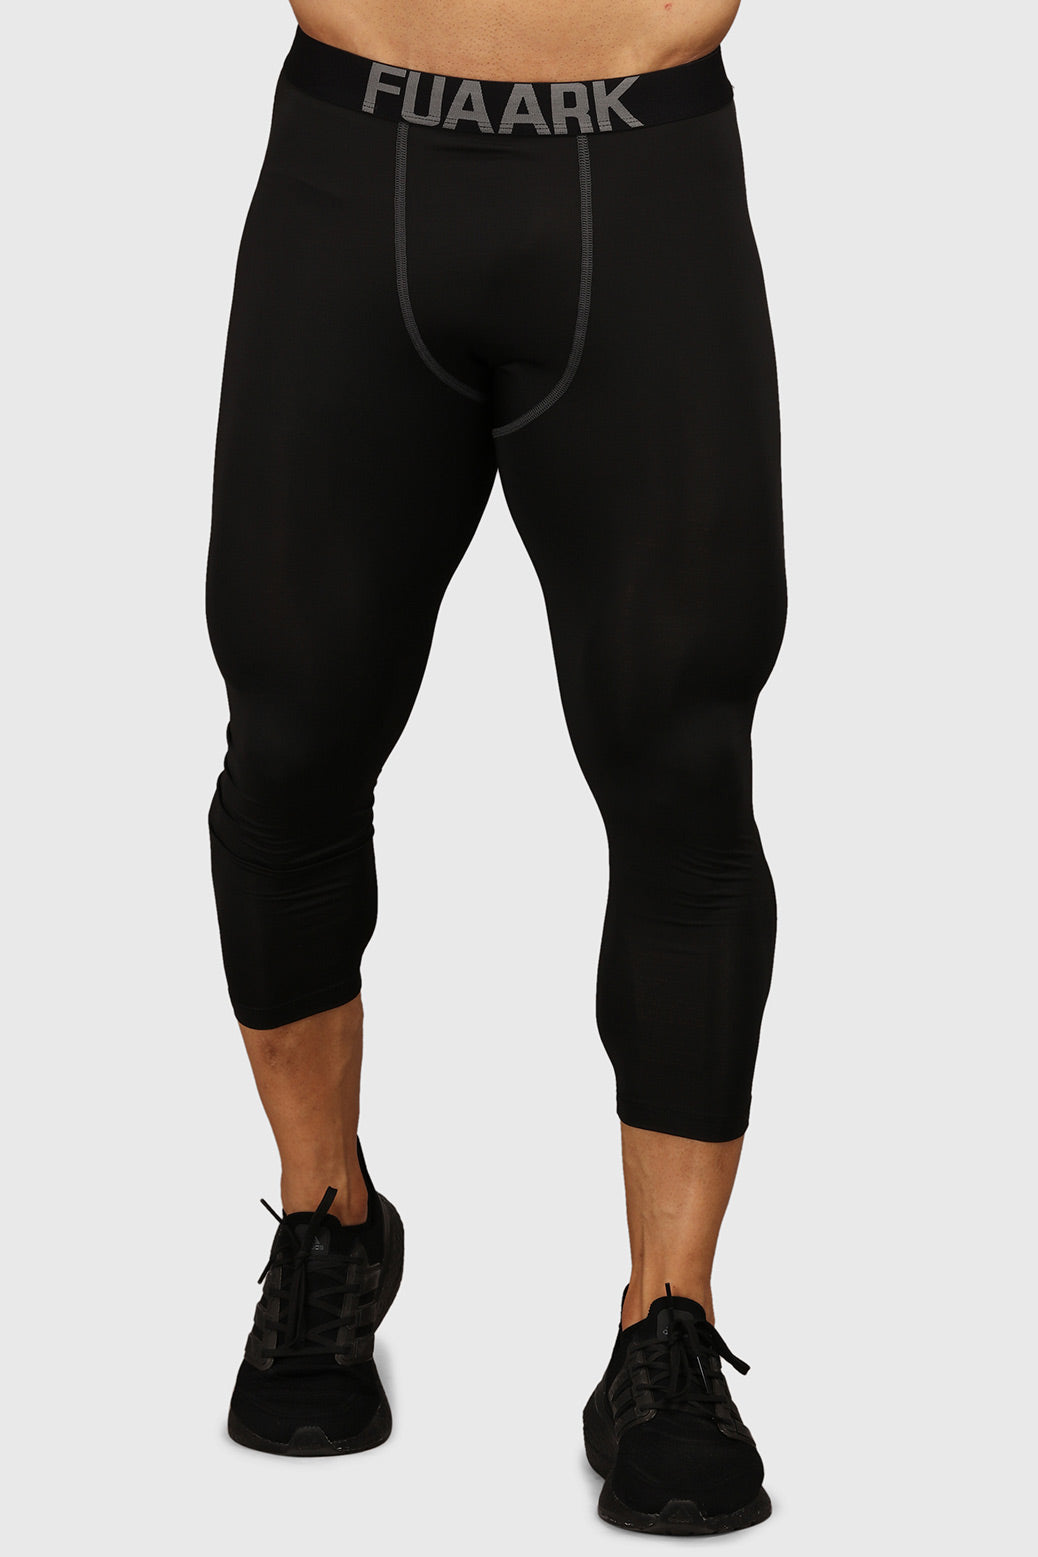 Nylon Compression Pant and Full Tights For Men BLACKRED  ReDesign Sports